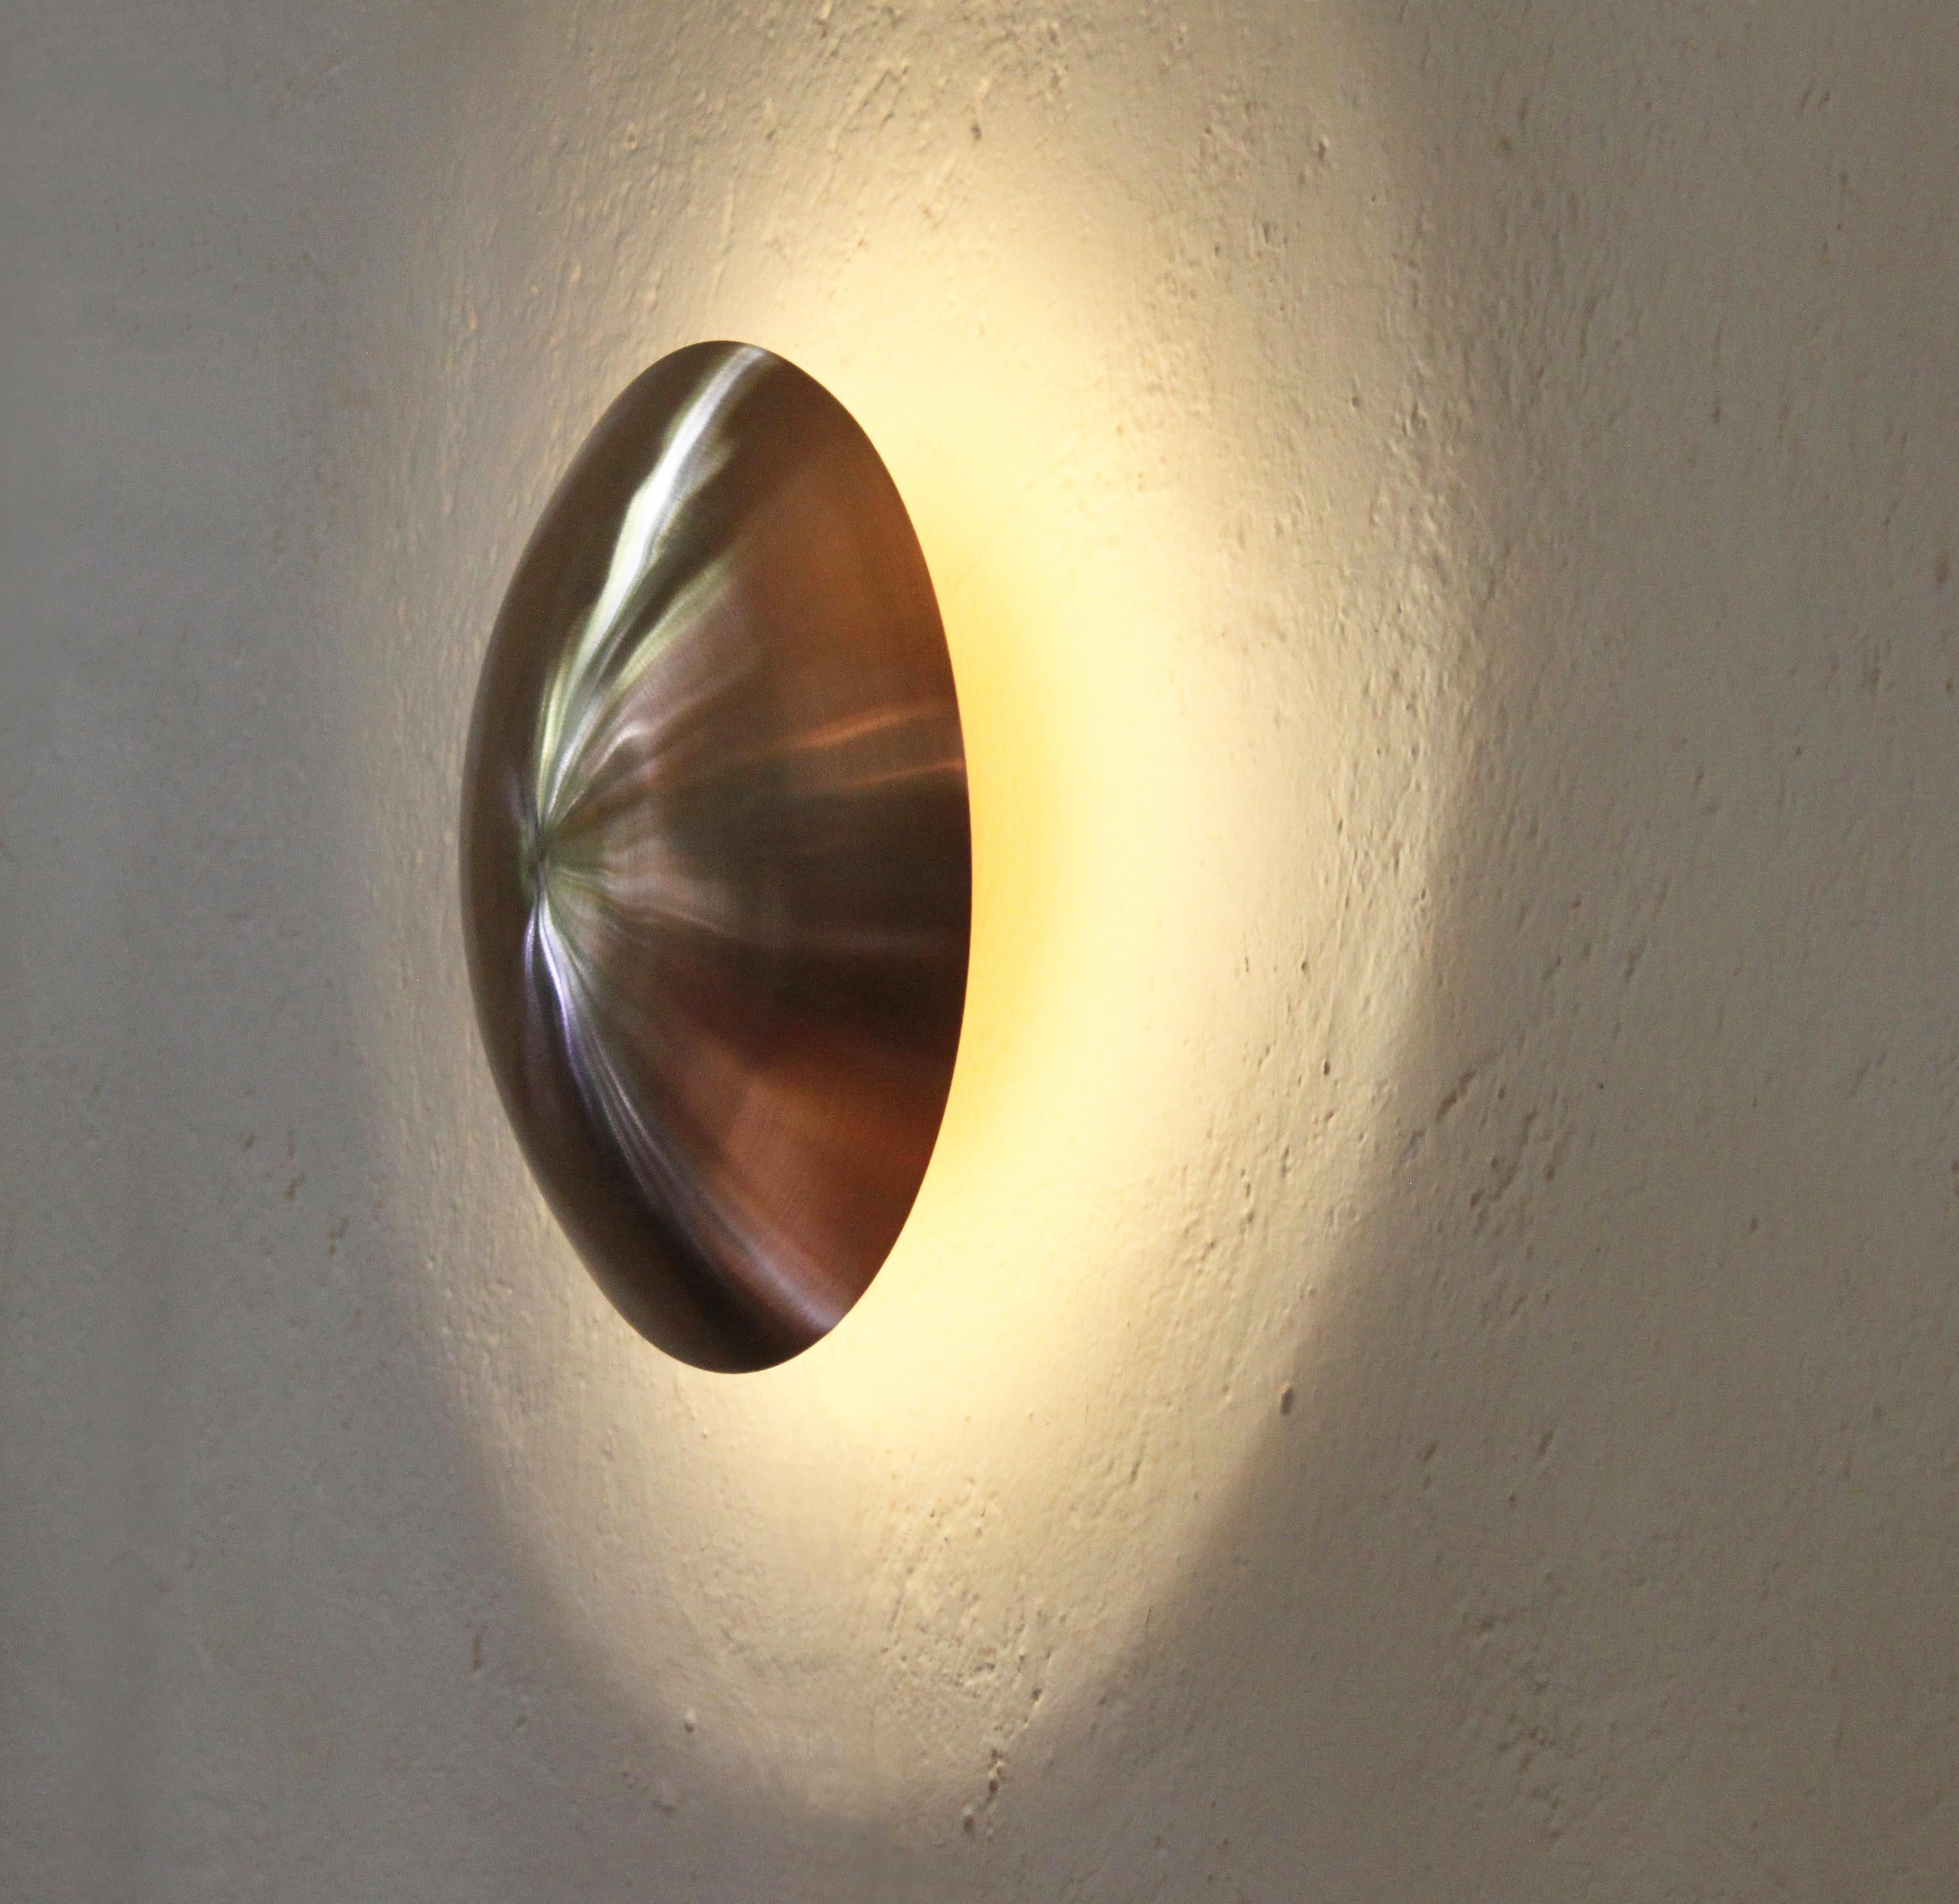 Mexican Plato Dentro 30 Wall Sconce by Maria Beckmann, REP by Tuleste Factory